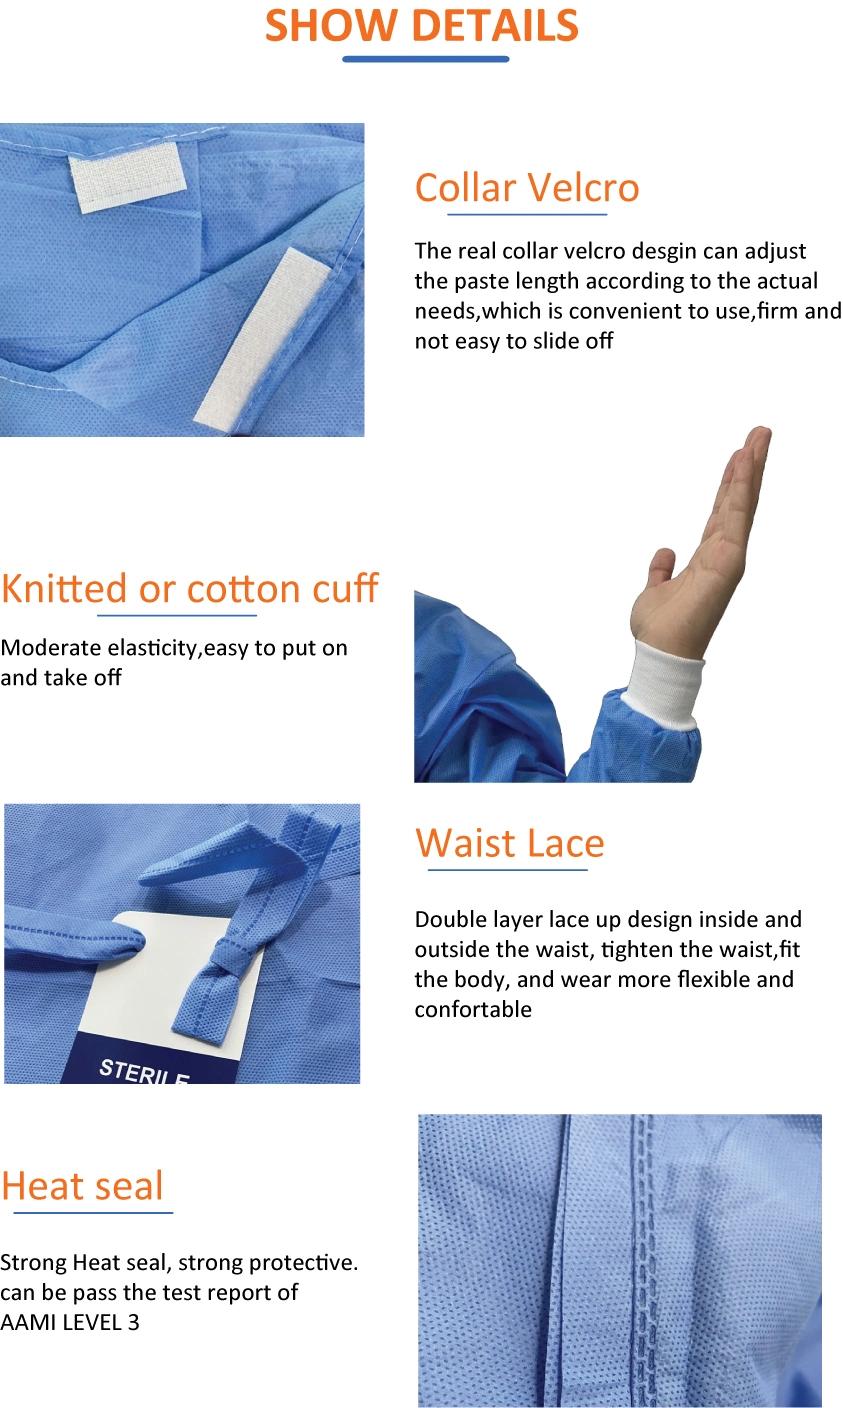 Medical Nonwoven SMS//SMMS Surgical Gown, Hospital Surgeon Clothing